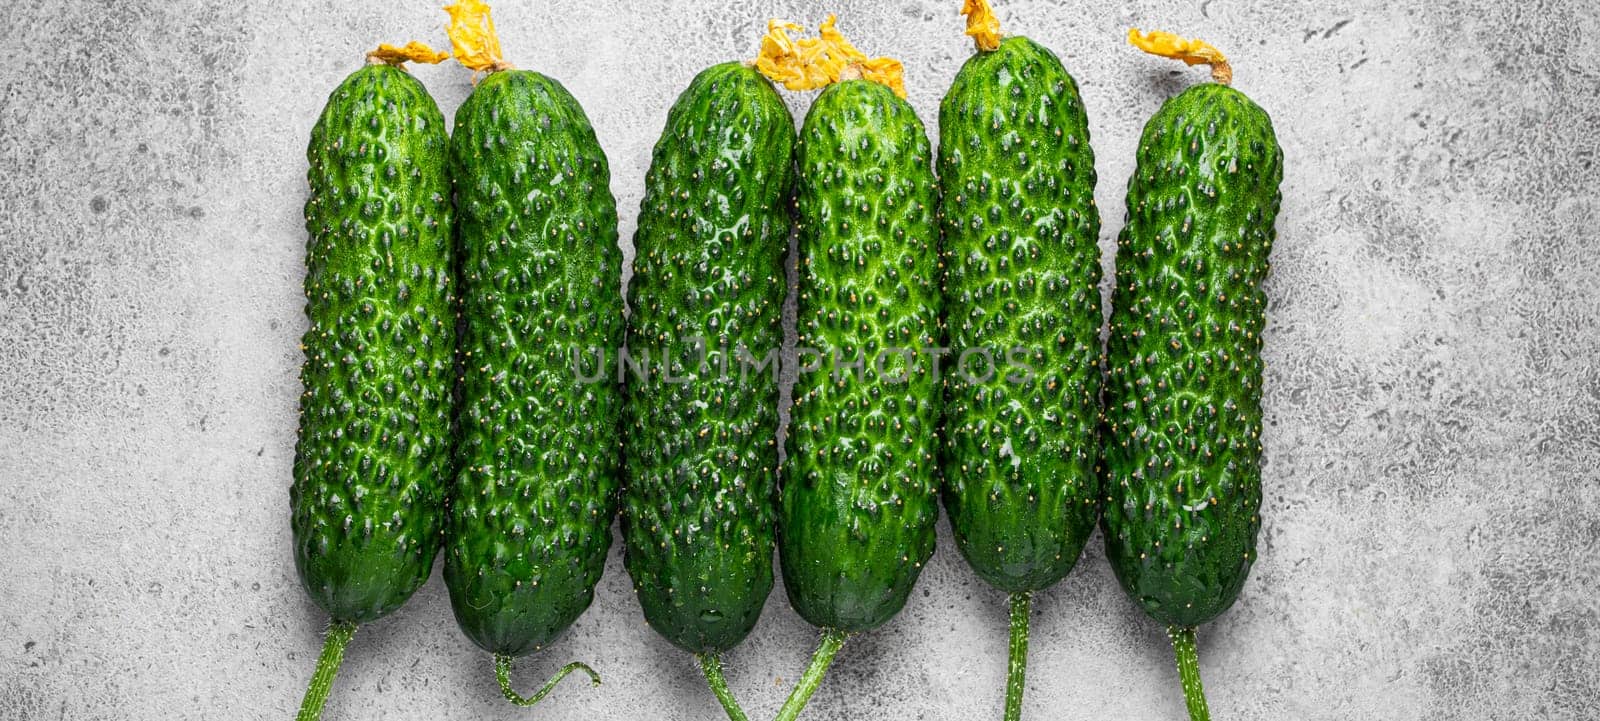 Fresh raw organic farmer cucumbers with leafs arranged on grey rustic stone background top view, healthy cucumbers in balanced nutrition, cooking concept by its_al_dente